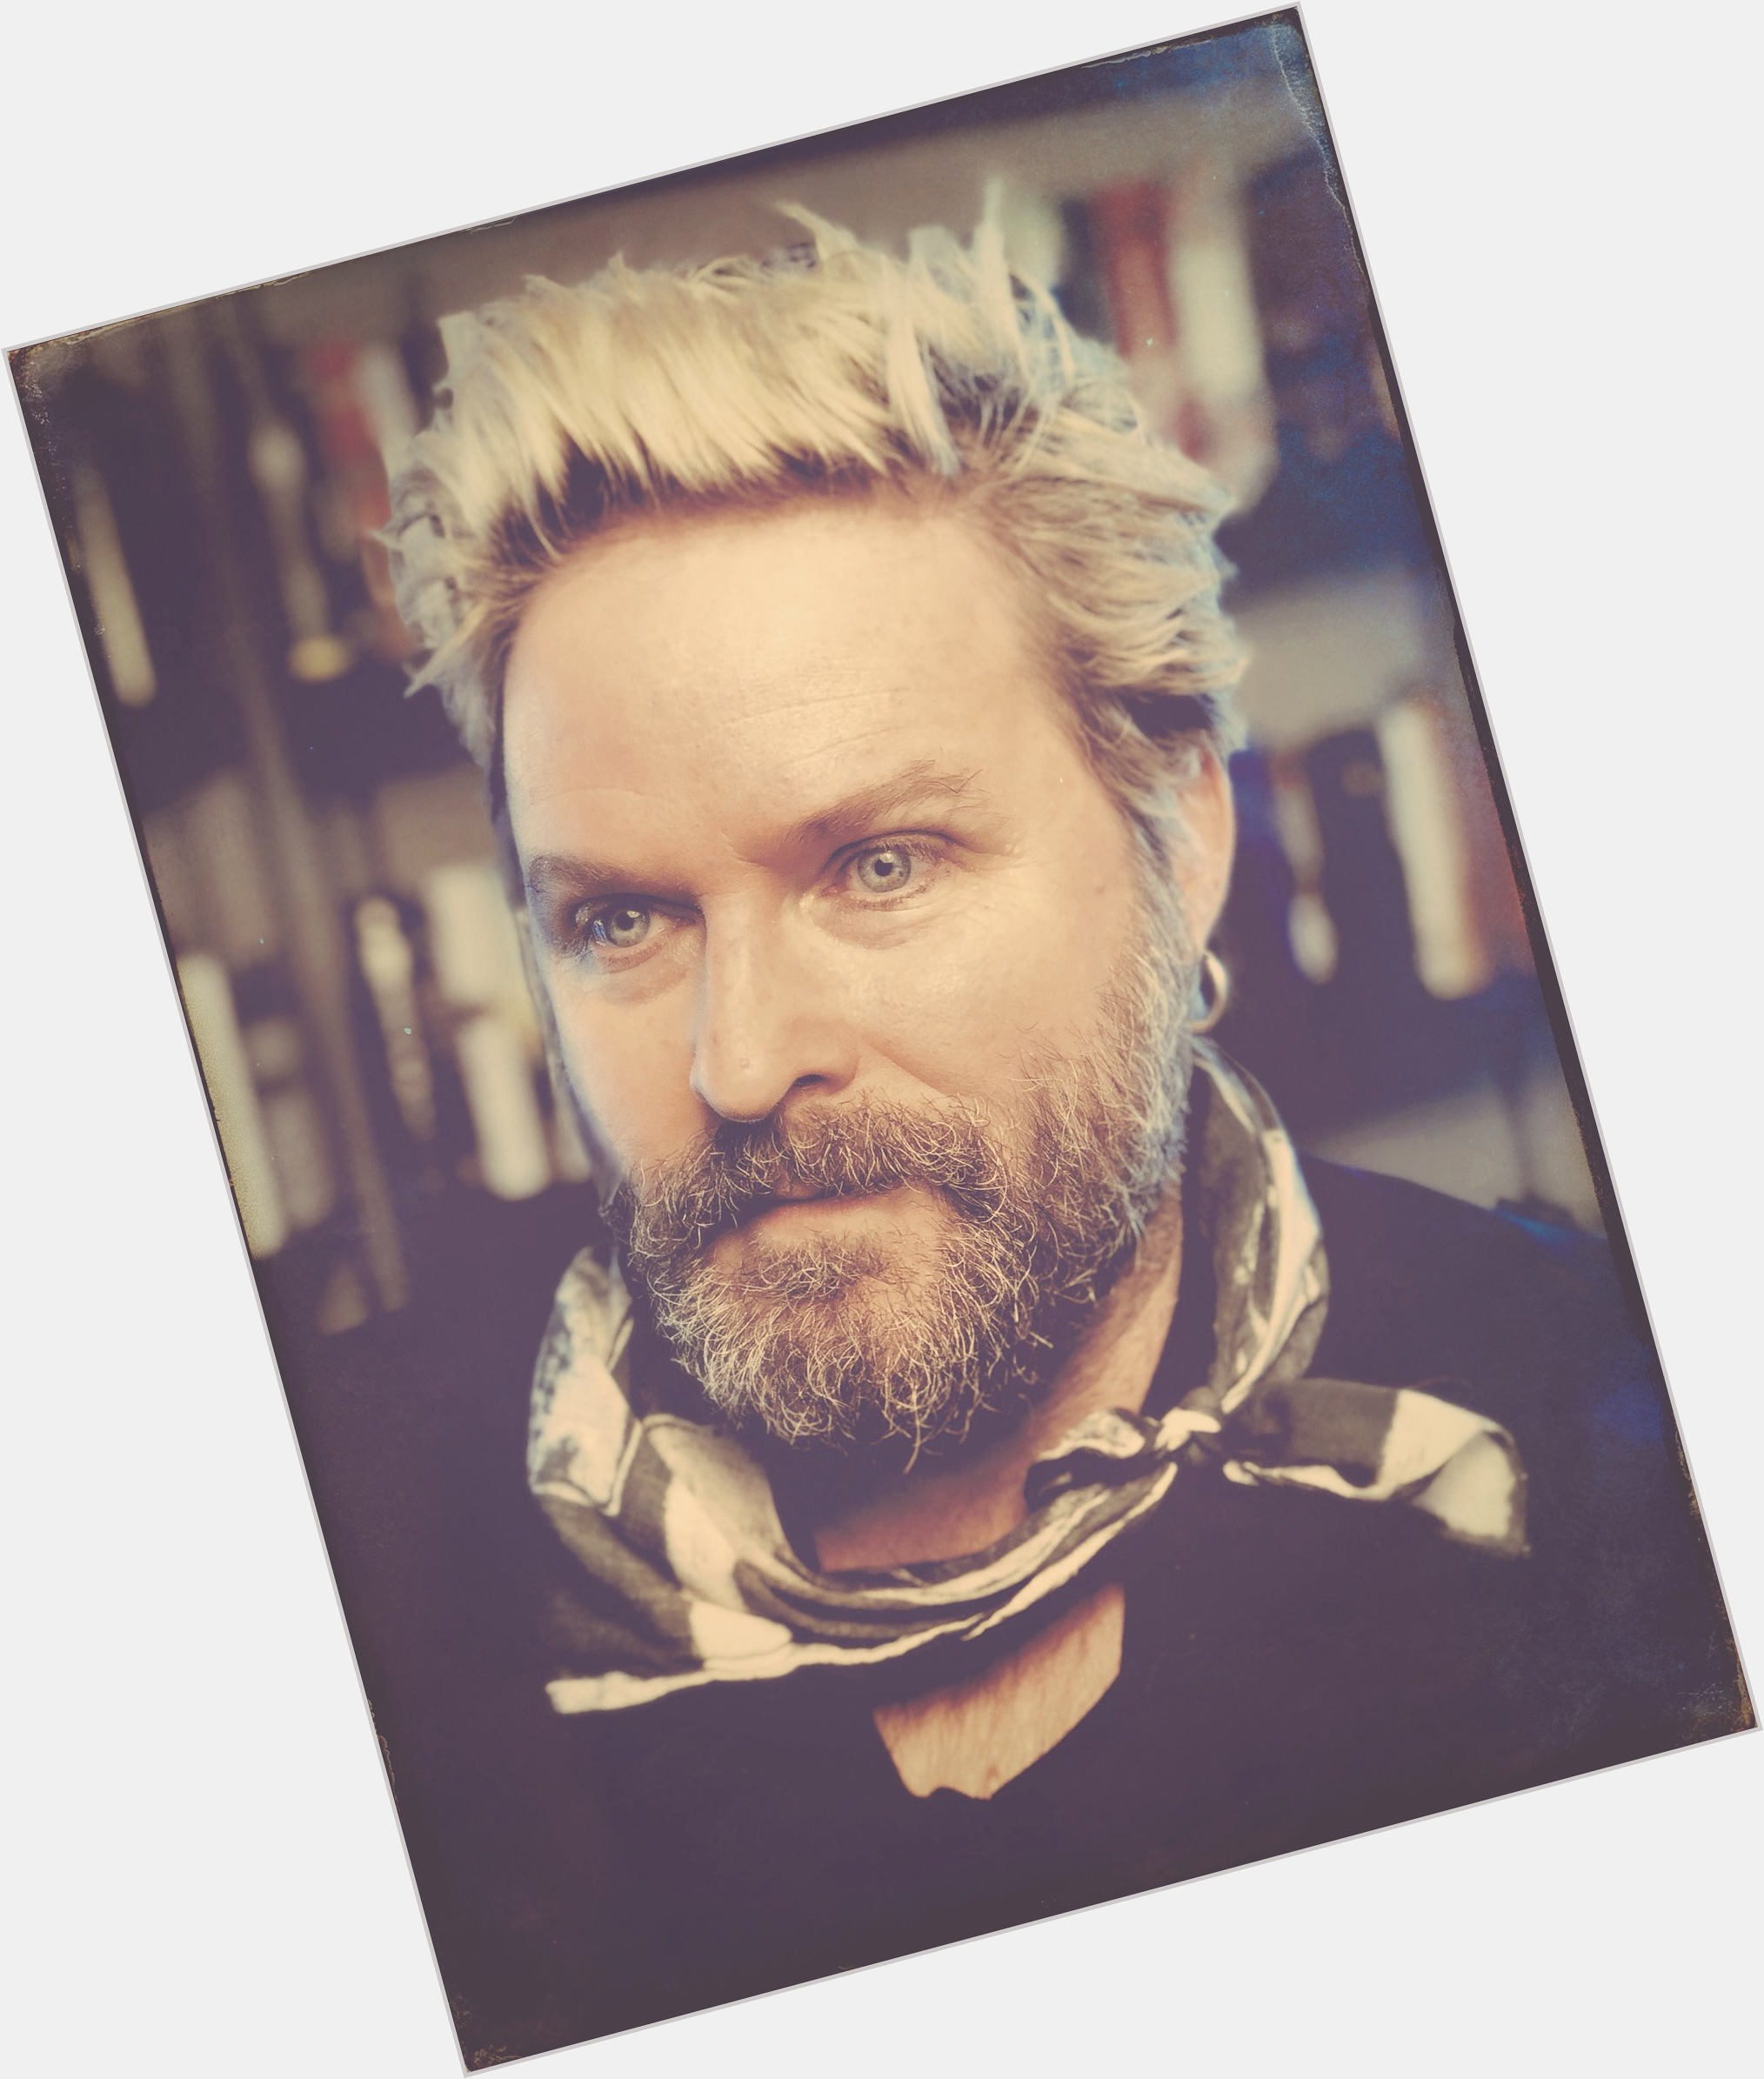 Kevin Max hairstyle 3